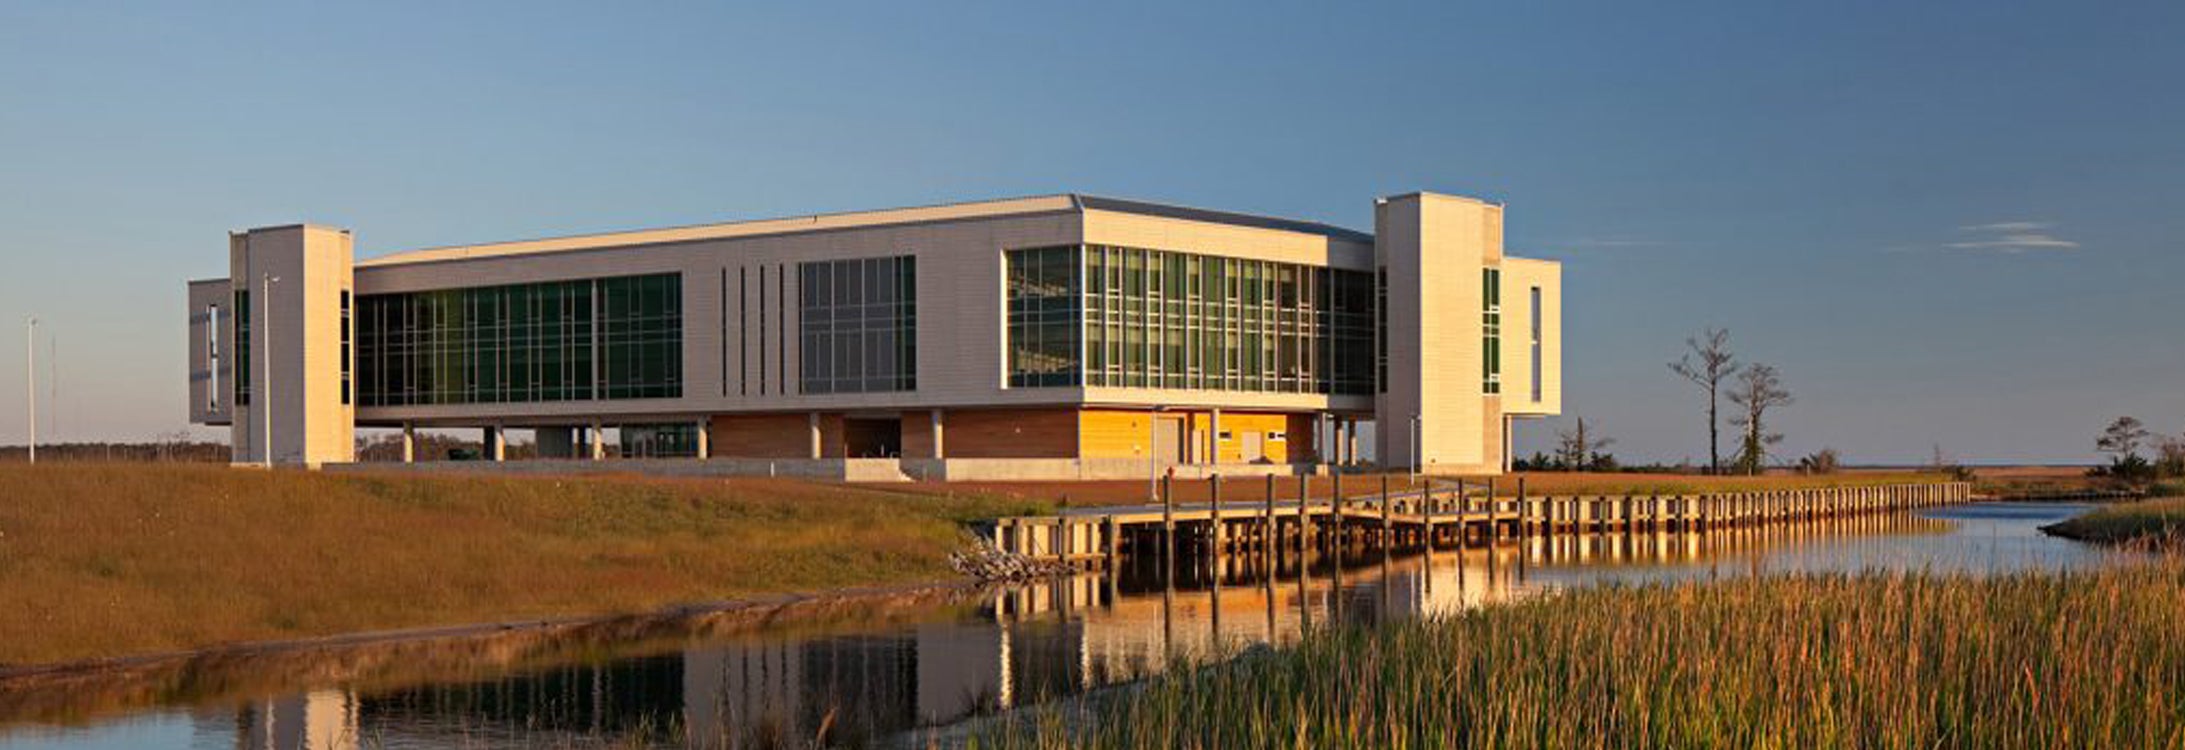 Outer Banks Campus